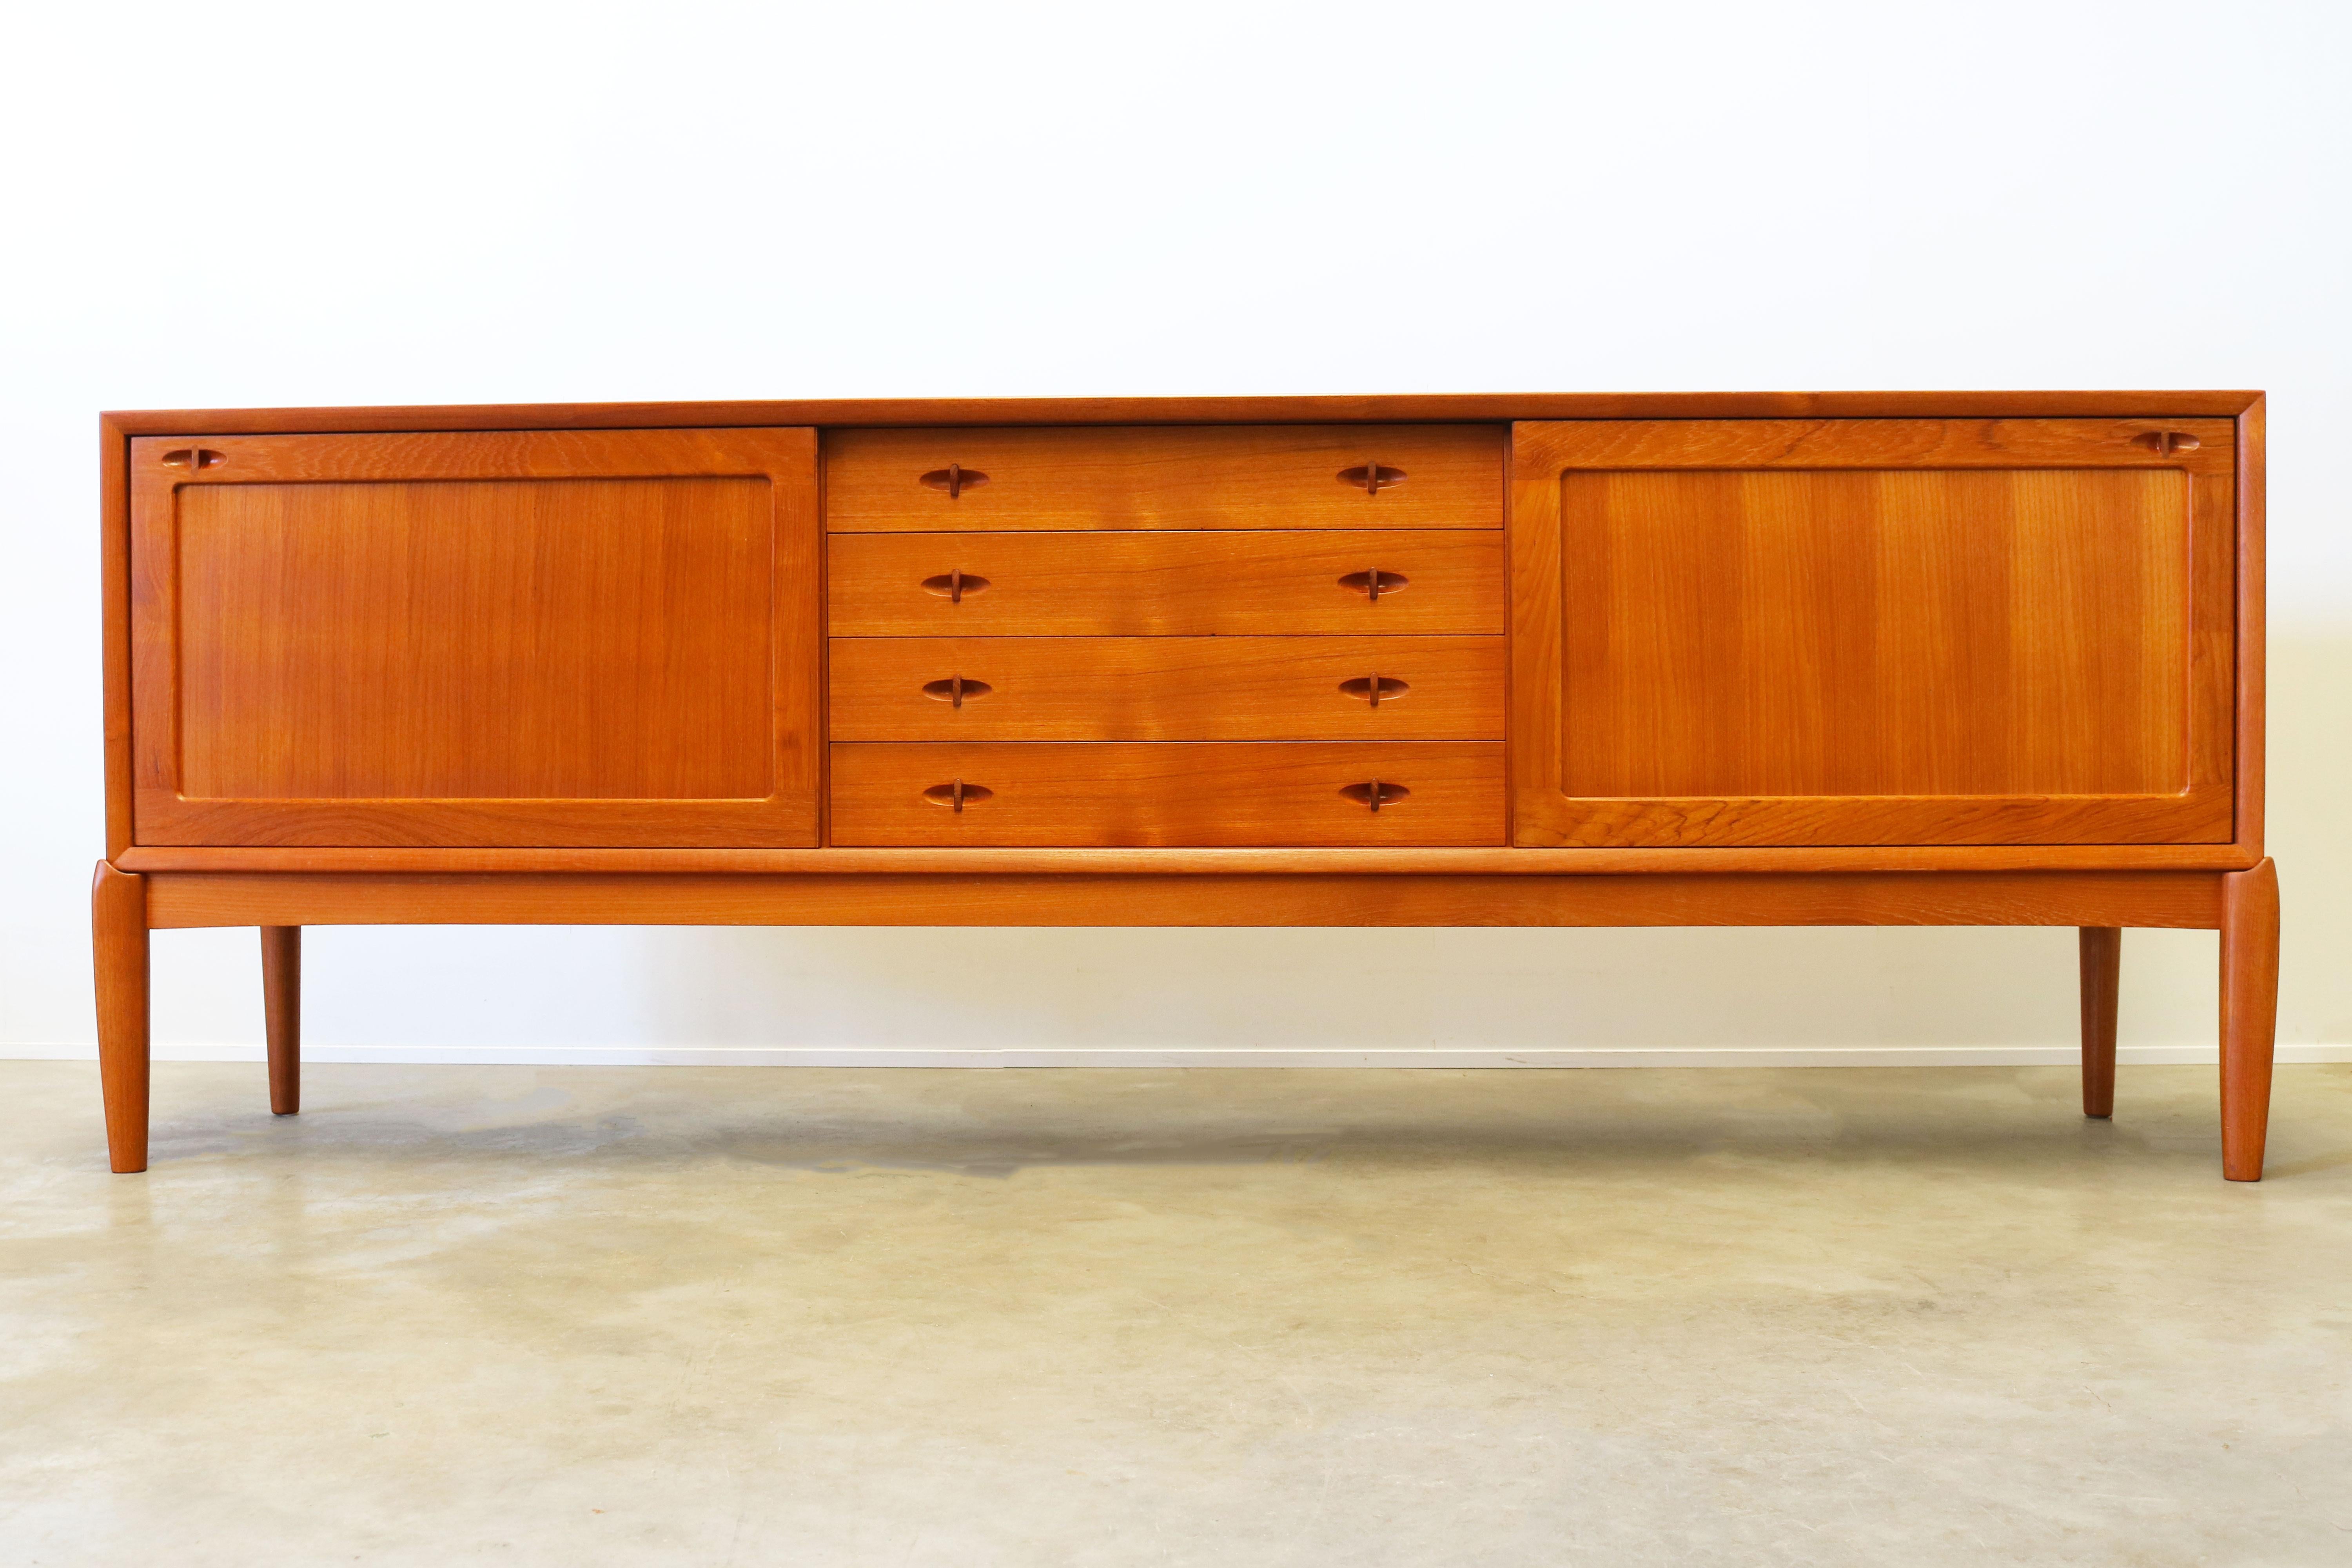 Magnificent Danish design sideboard designed by H.W. Klein for Bramin in the 1950s. The sideboard is made from solid teak wood and is famous for its combination between straight and organic lines with in particular the organic (solid wood) sculpted